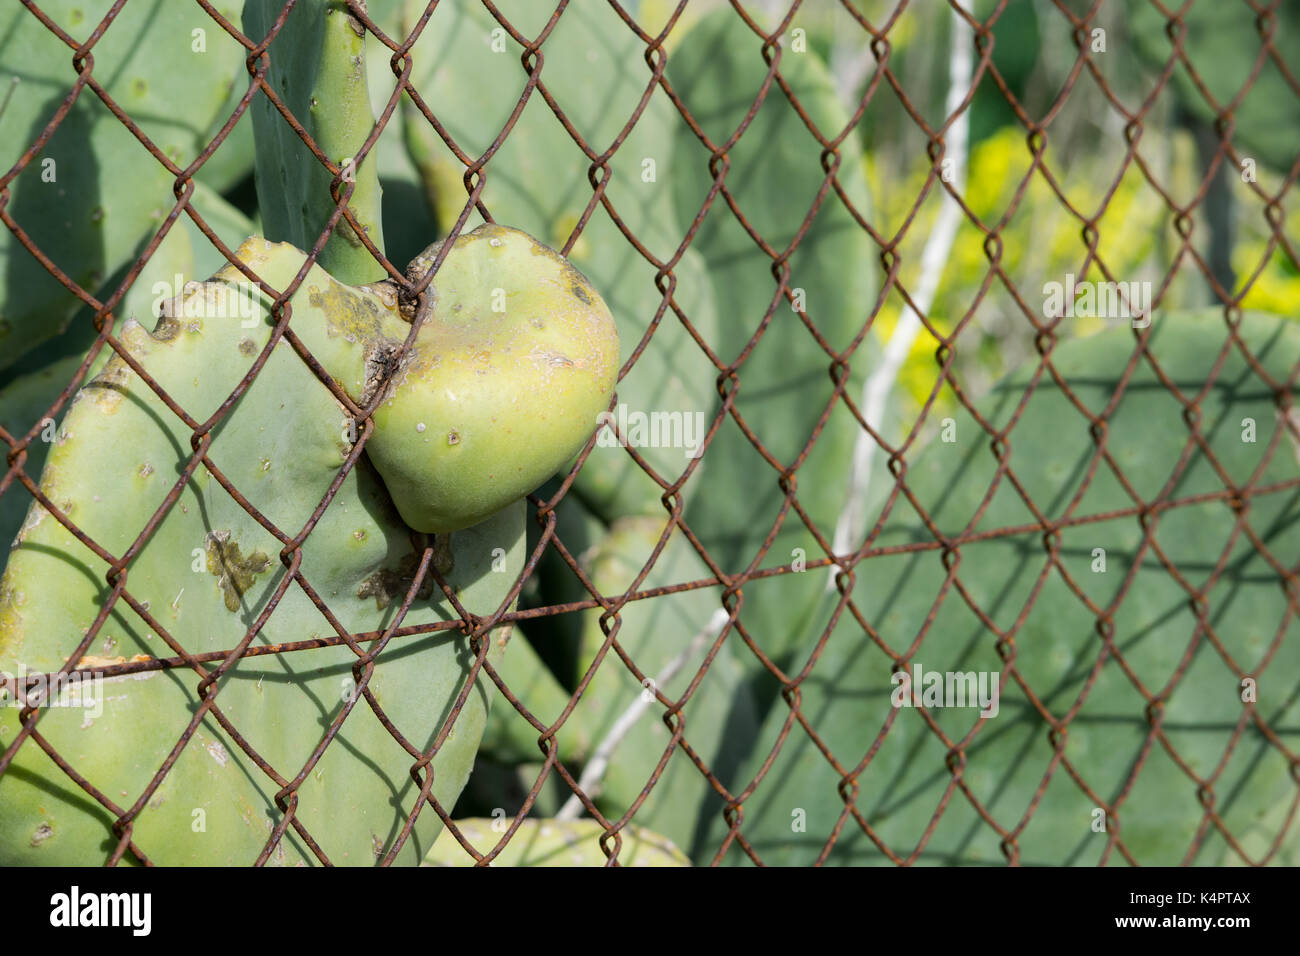 The force of nature adapts to man made structures, as a prickly pear pad emerges through rusting fence. Stock Photo